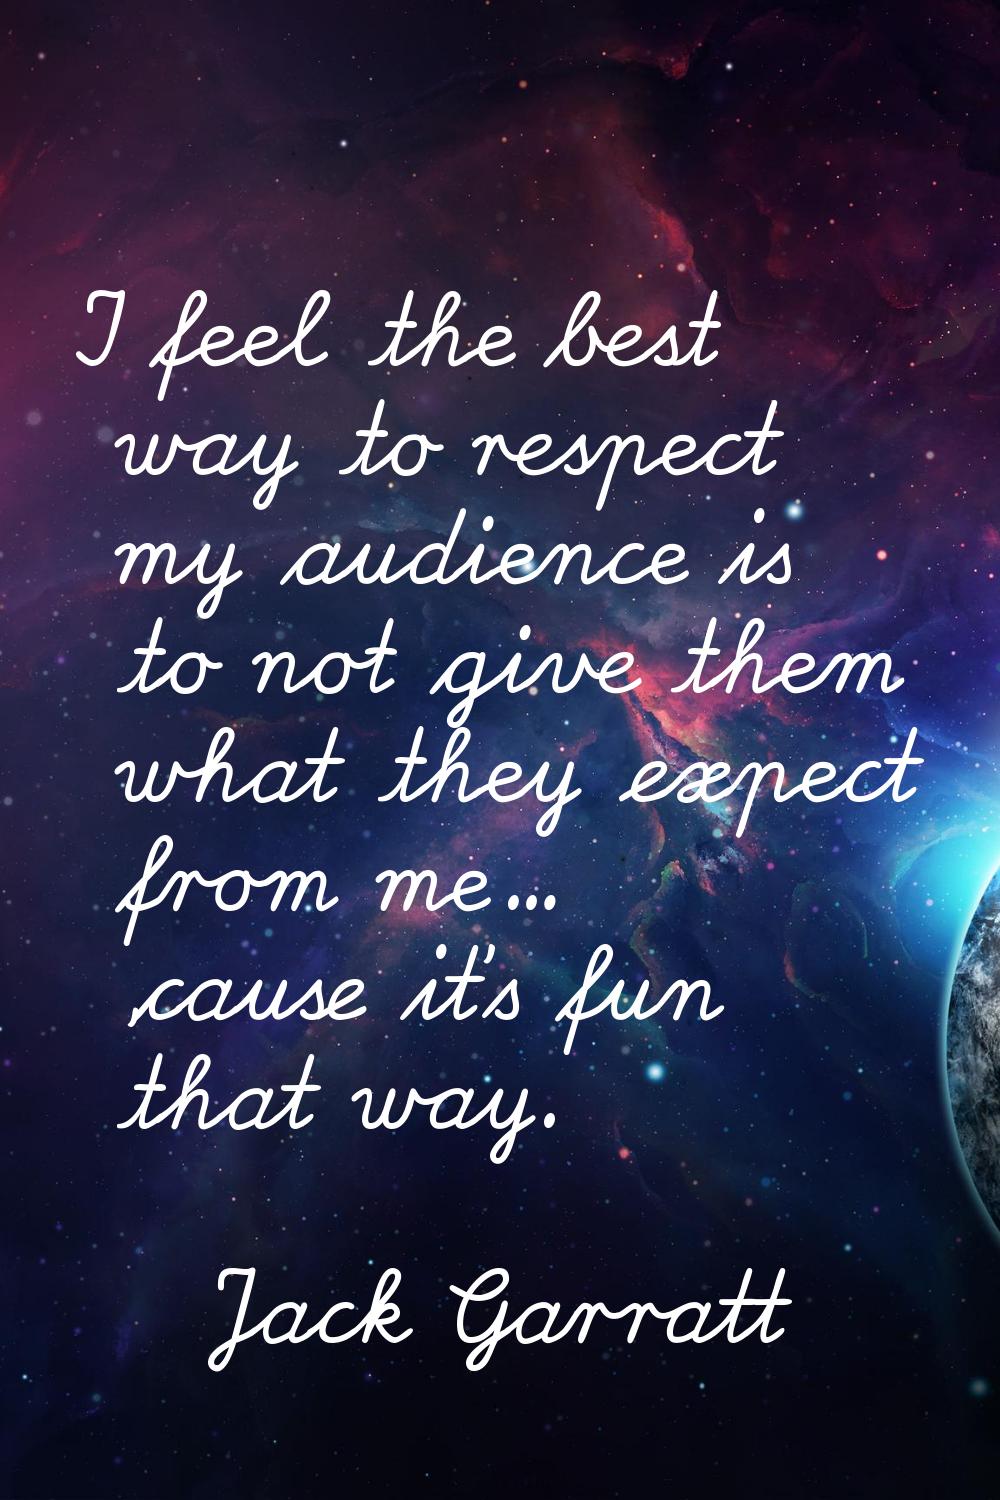 I feel the best way to respect my audience is to not give them what they expect from me... 'cause i